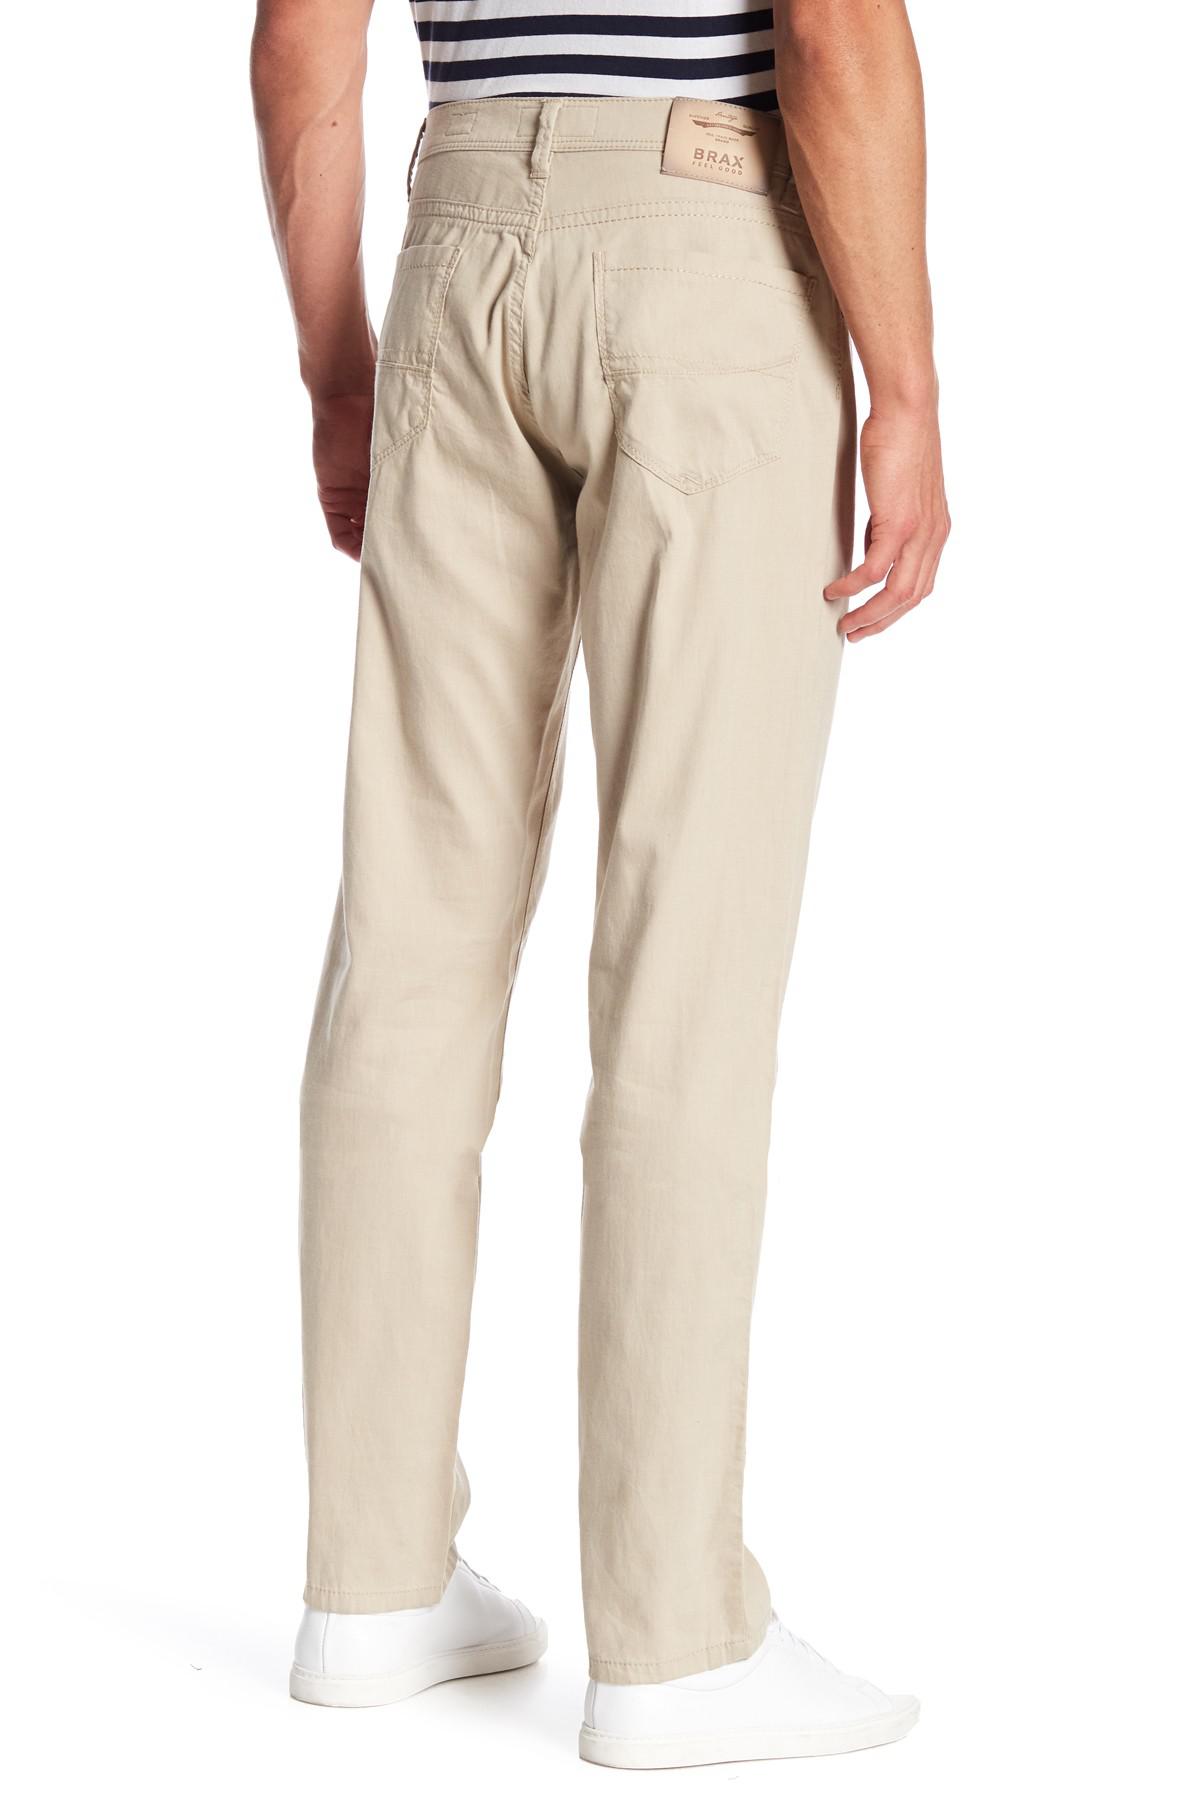 Brax Lightweight Pants in Natural for |